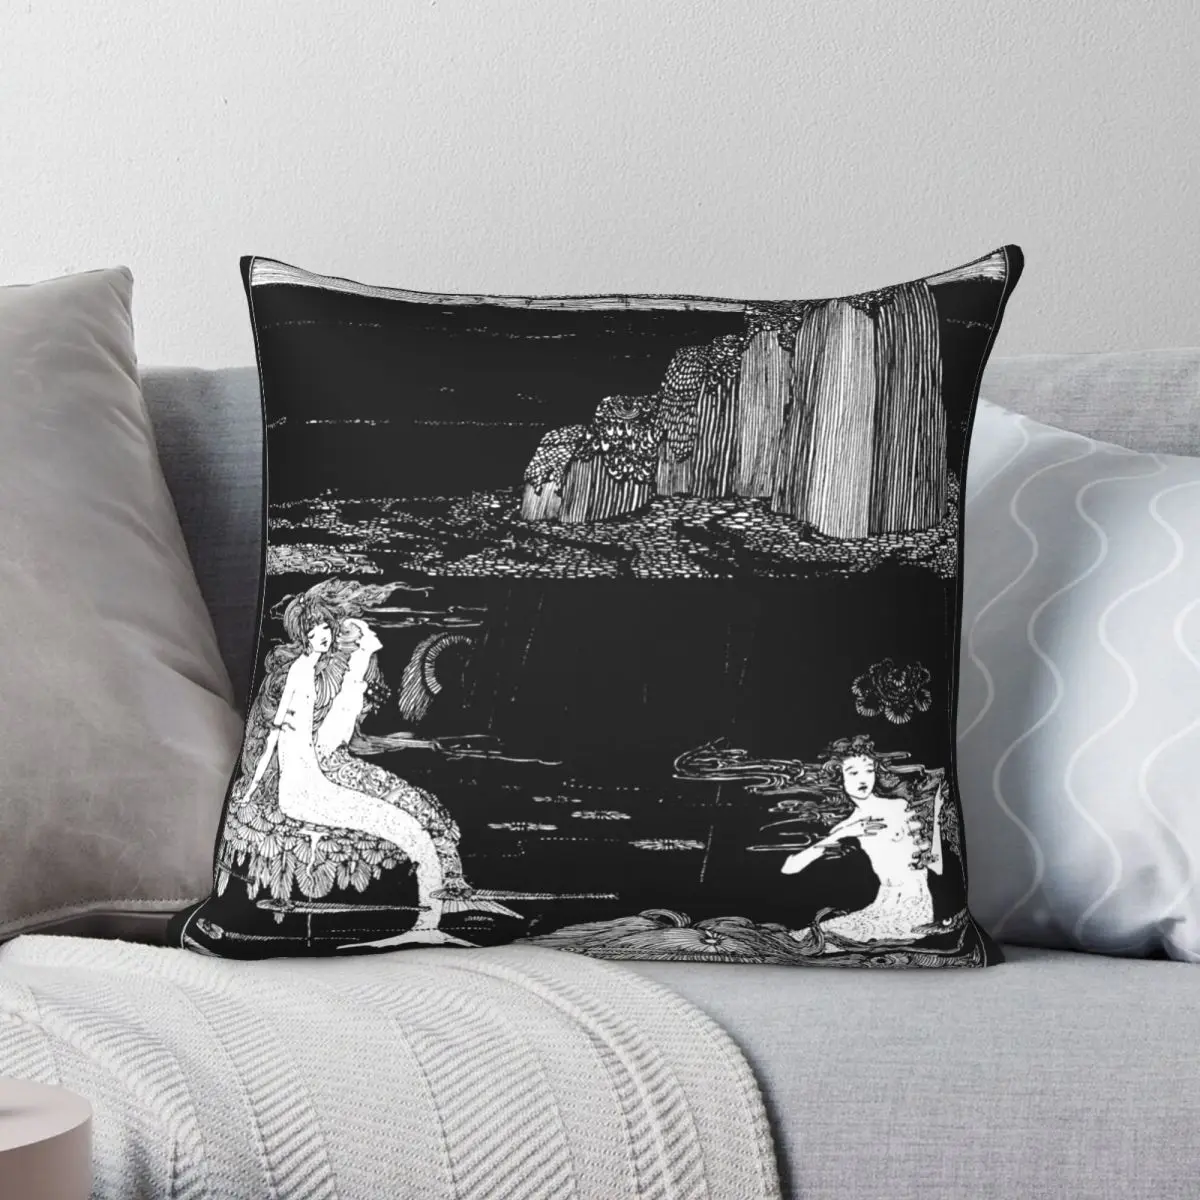 Very Nearly Harry Clarke Mermaids Square Pillowcase Polyester Linen Velvet Printed Zip Decor Throw Pillow Case Bed Cushion Cover